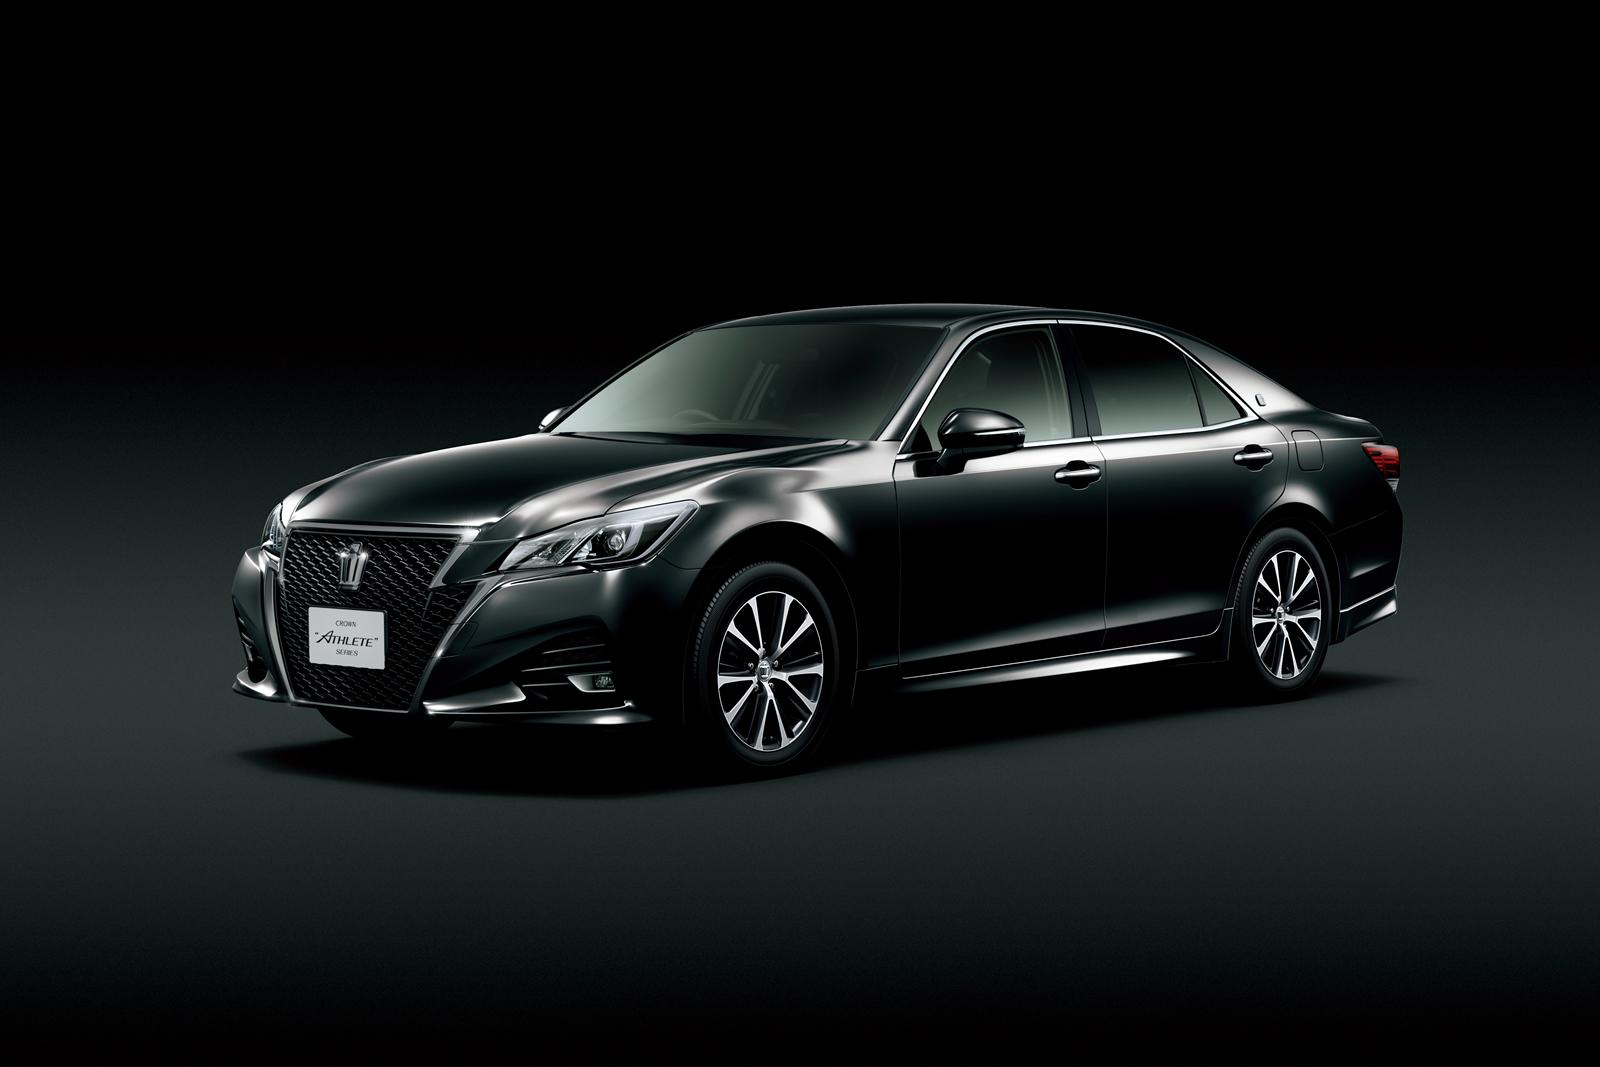 2014 Toyota  Crown  Athlete Is a Cool Sedan You Can t Have 